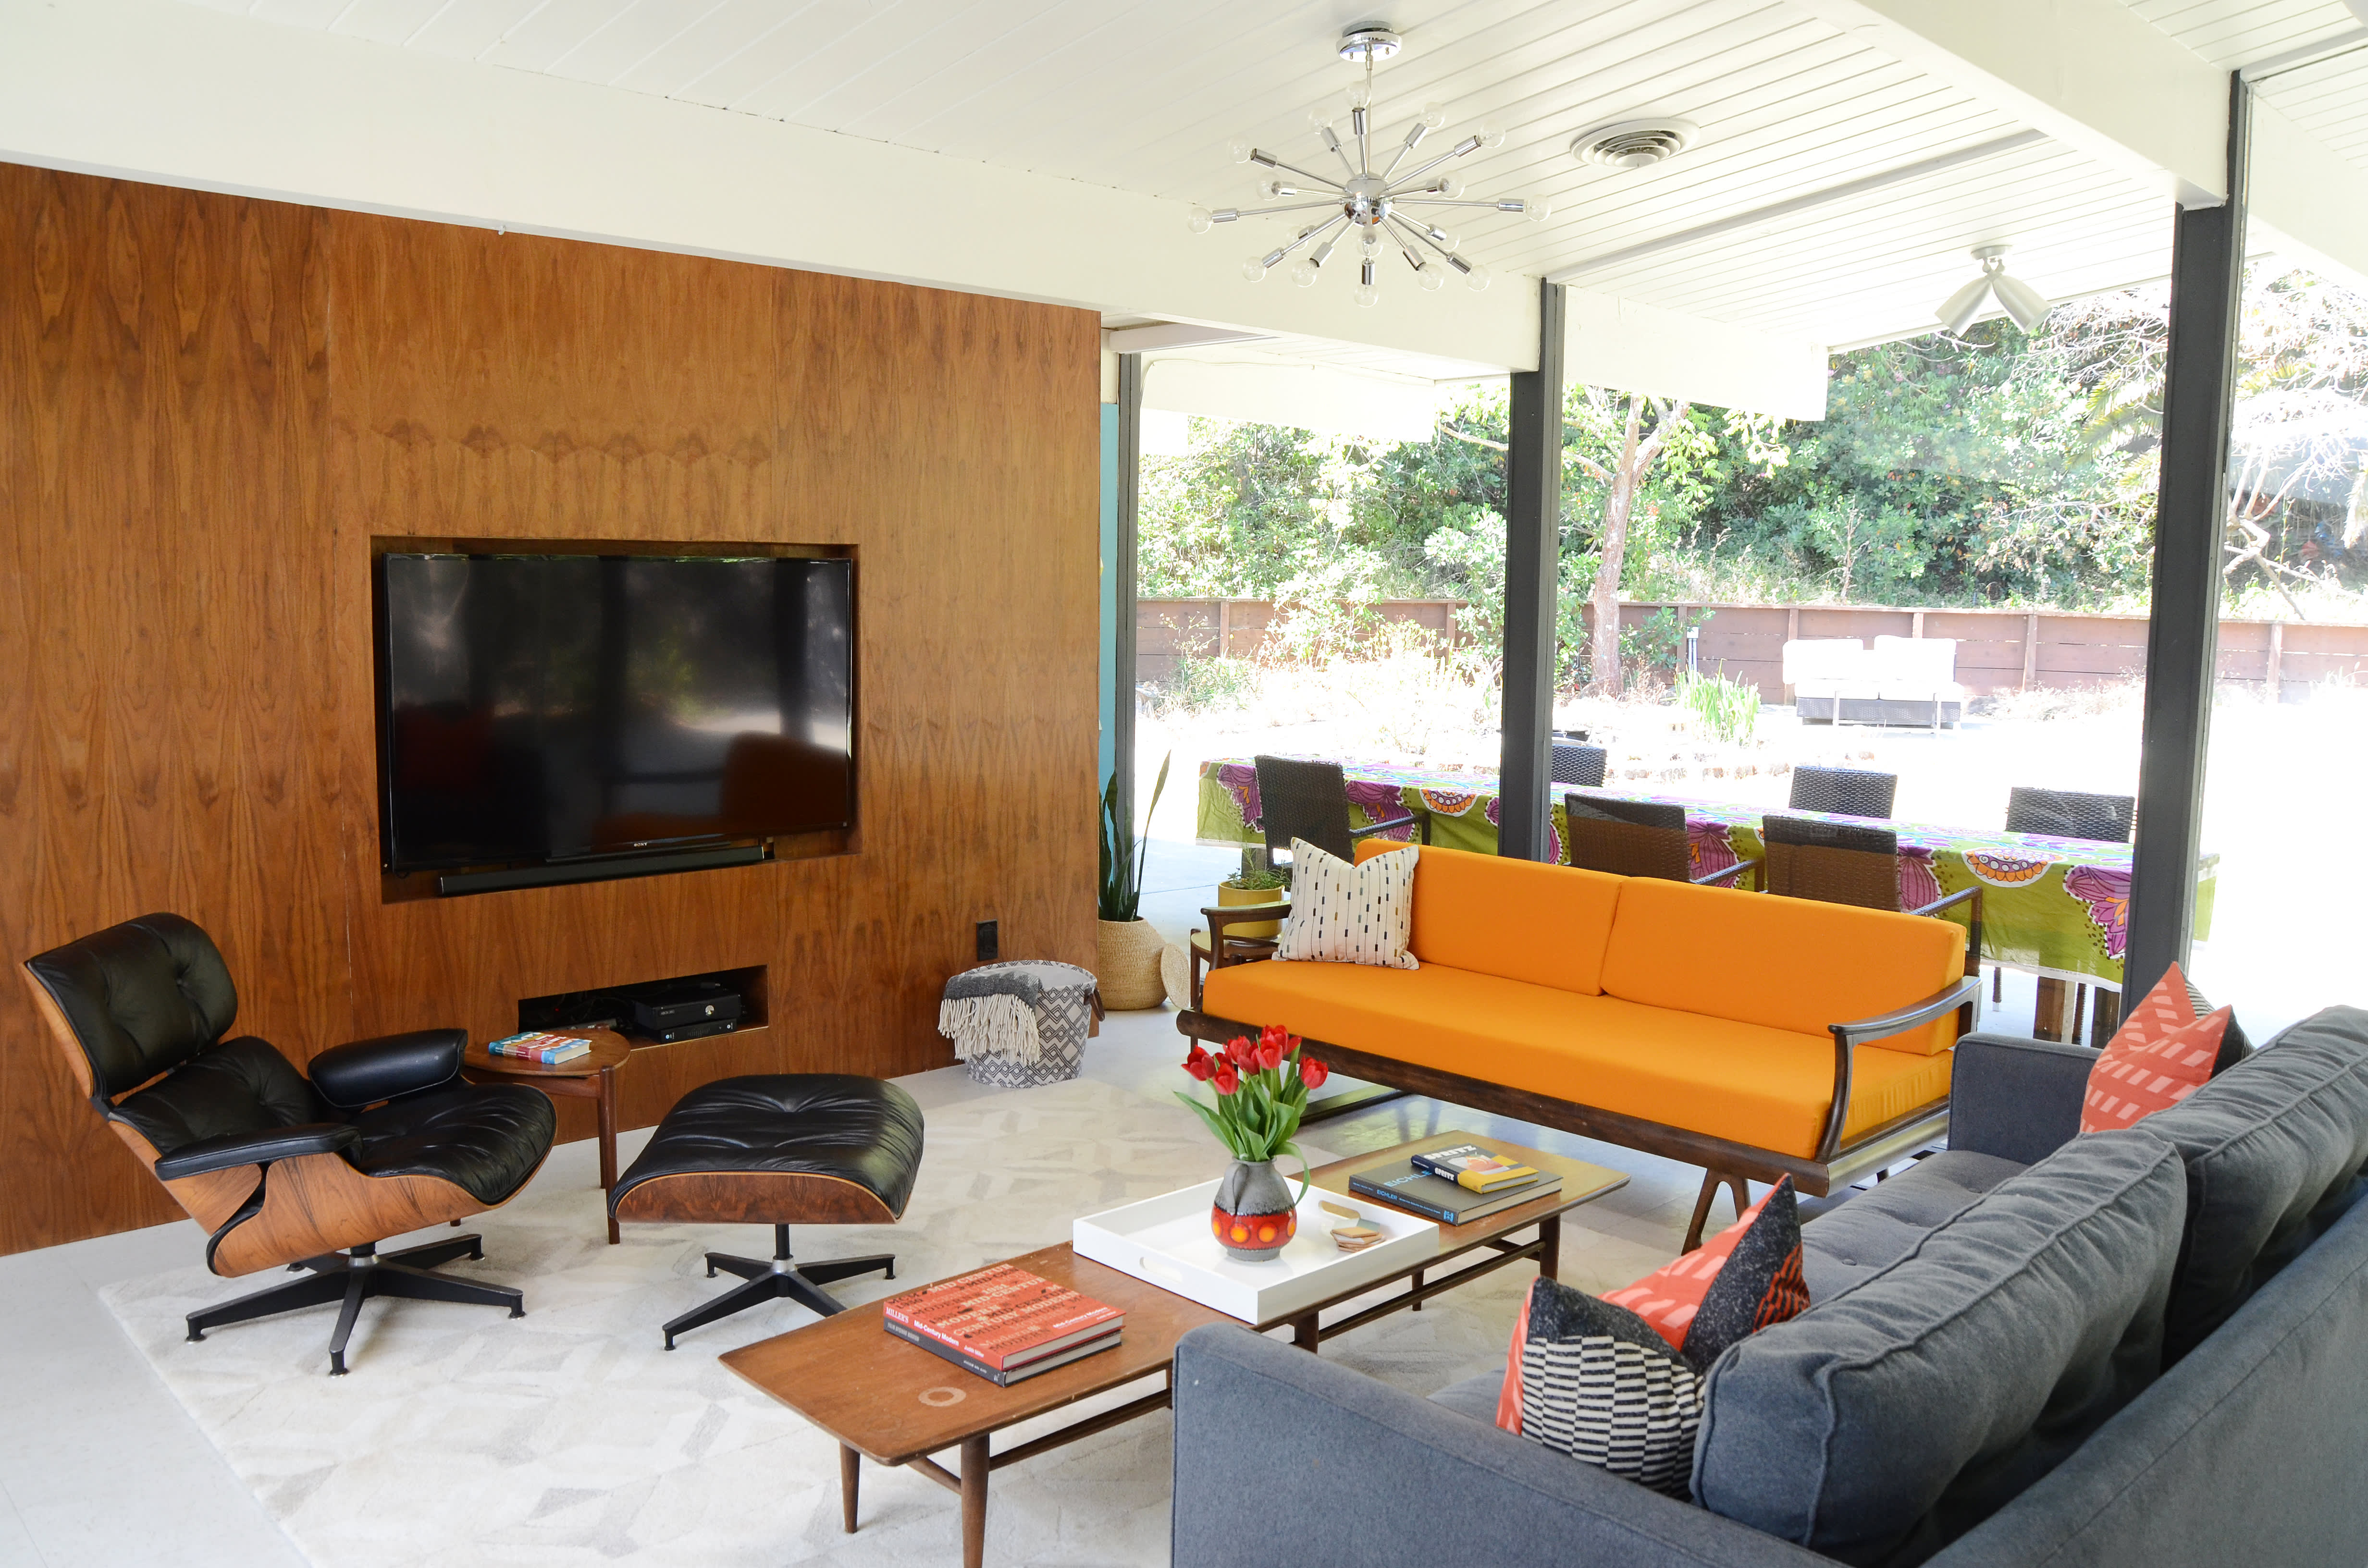 The Impact Of Mid Century Modern On Contemporary Design